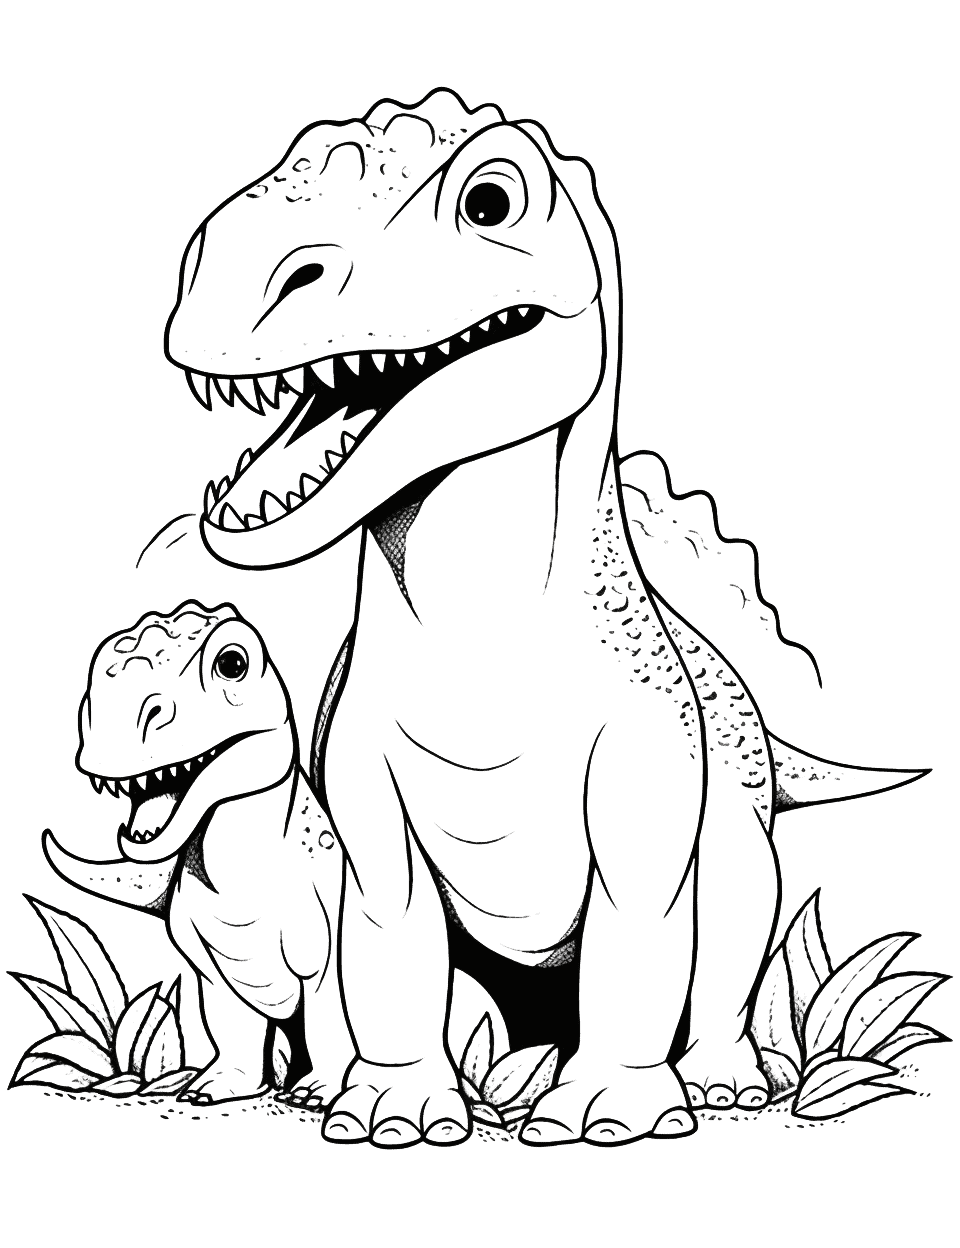 T-Rex Family Coloring Page - A family of T-Rex, featuring a parent and baby T-Rex.